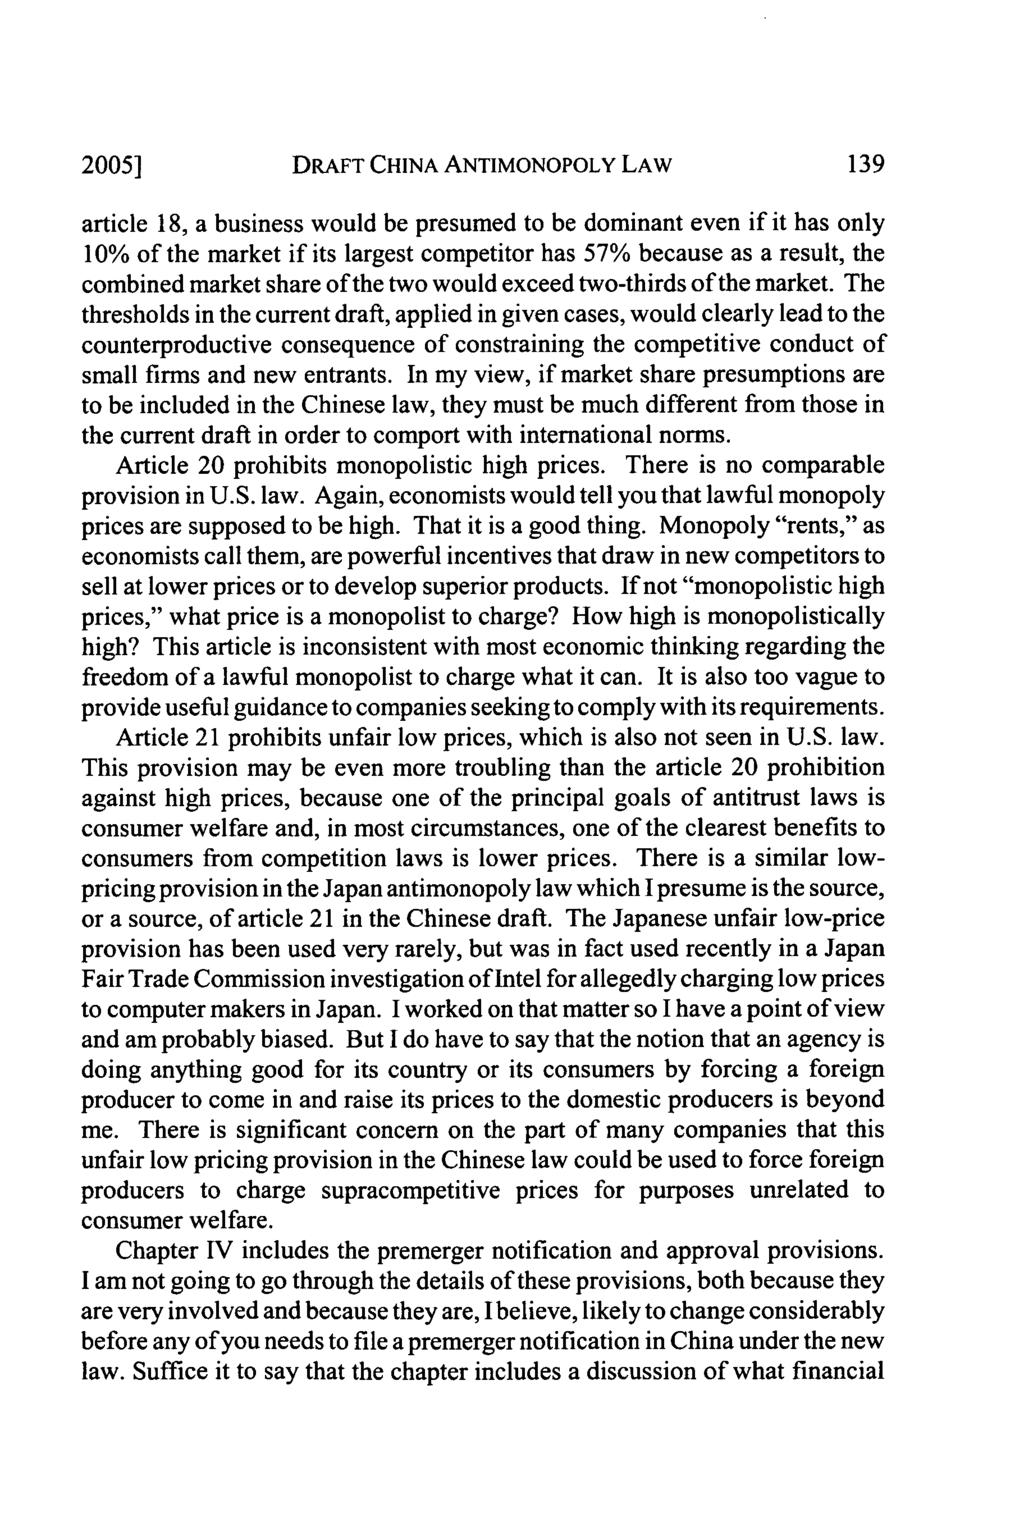 2005] DRAFT CHINA ANTIMONOPOLY LAW article 18, a business would be presumed to be dominant even if it has only 10% of the market if its largest competitor has 57% because as a result, the combined